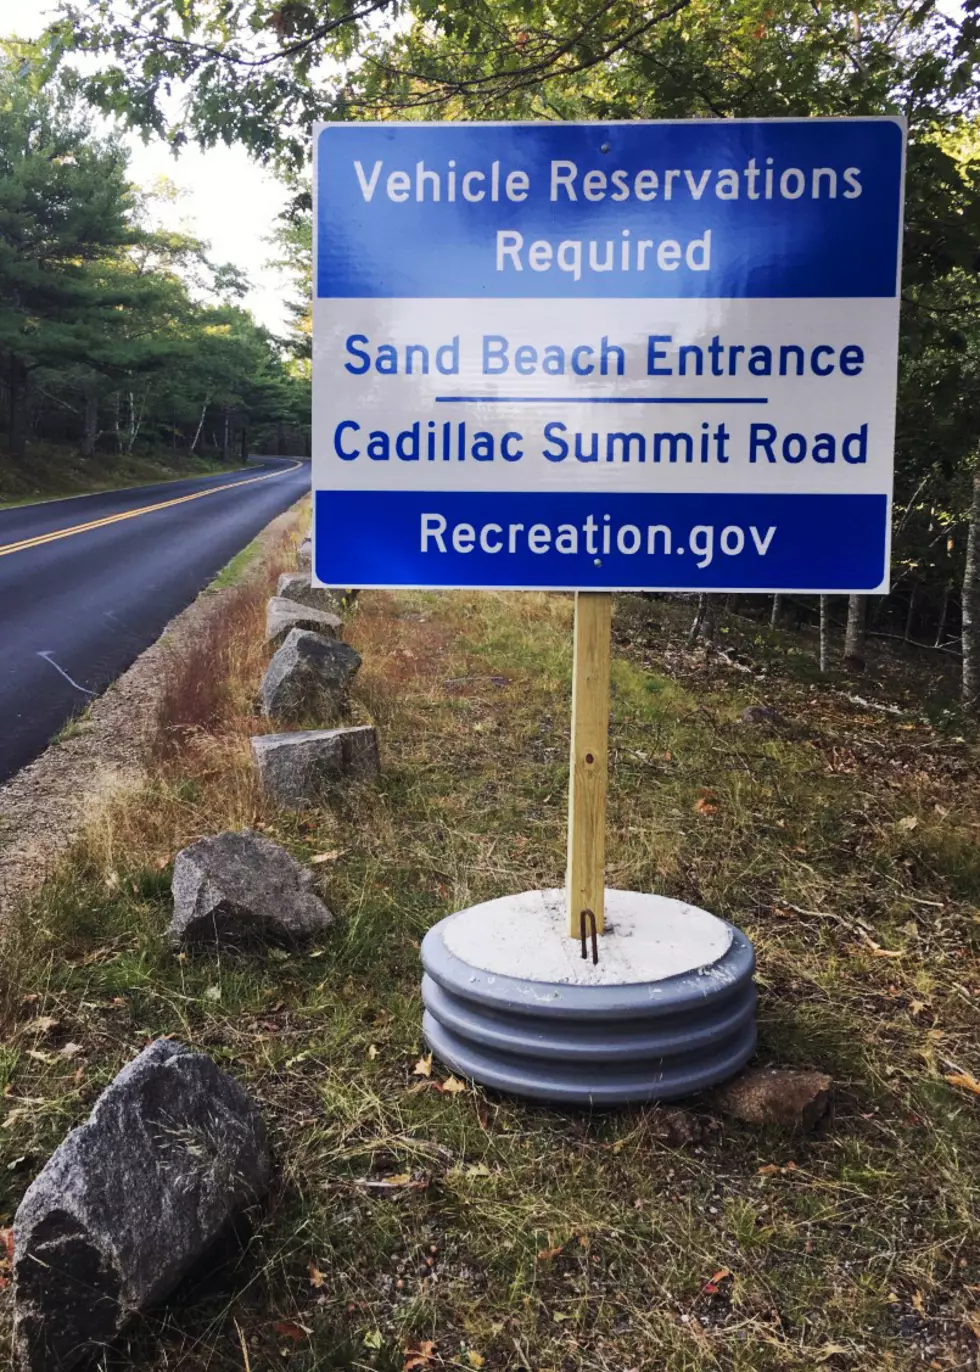 Vehicle Reservations for the Sand Beach Entrance and Cadillac Summit Road at Acadia National Park Begin October 1